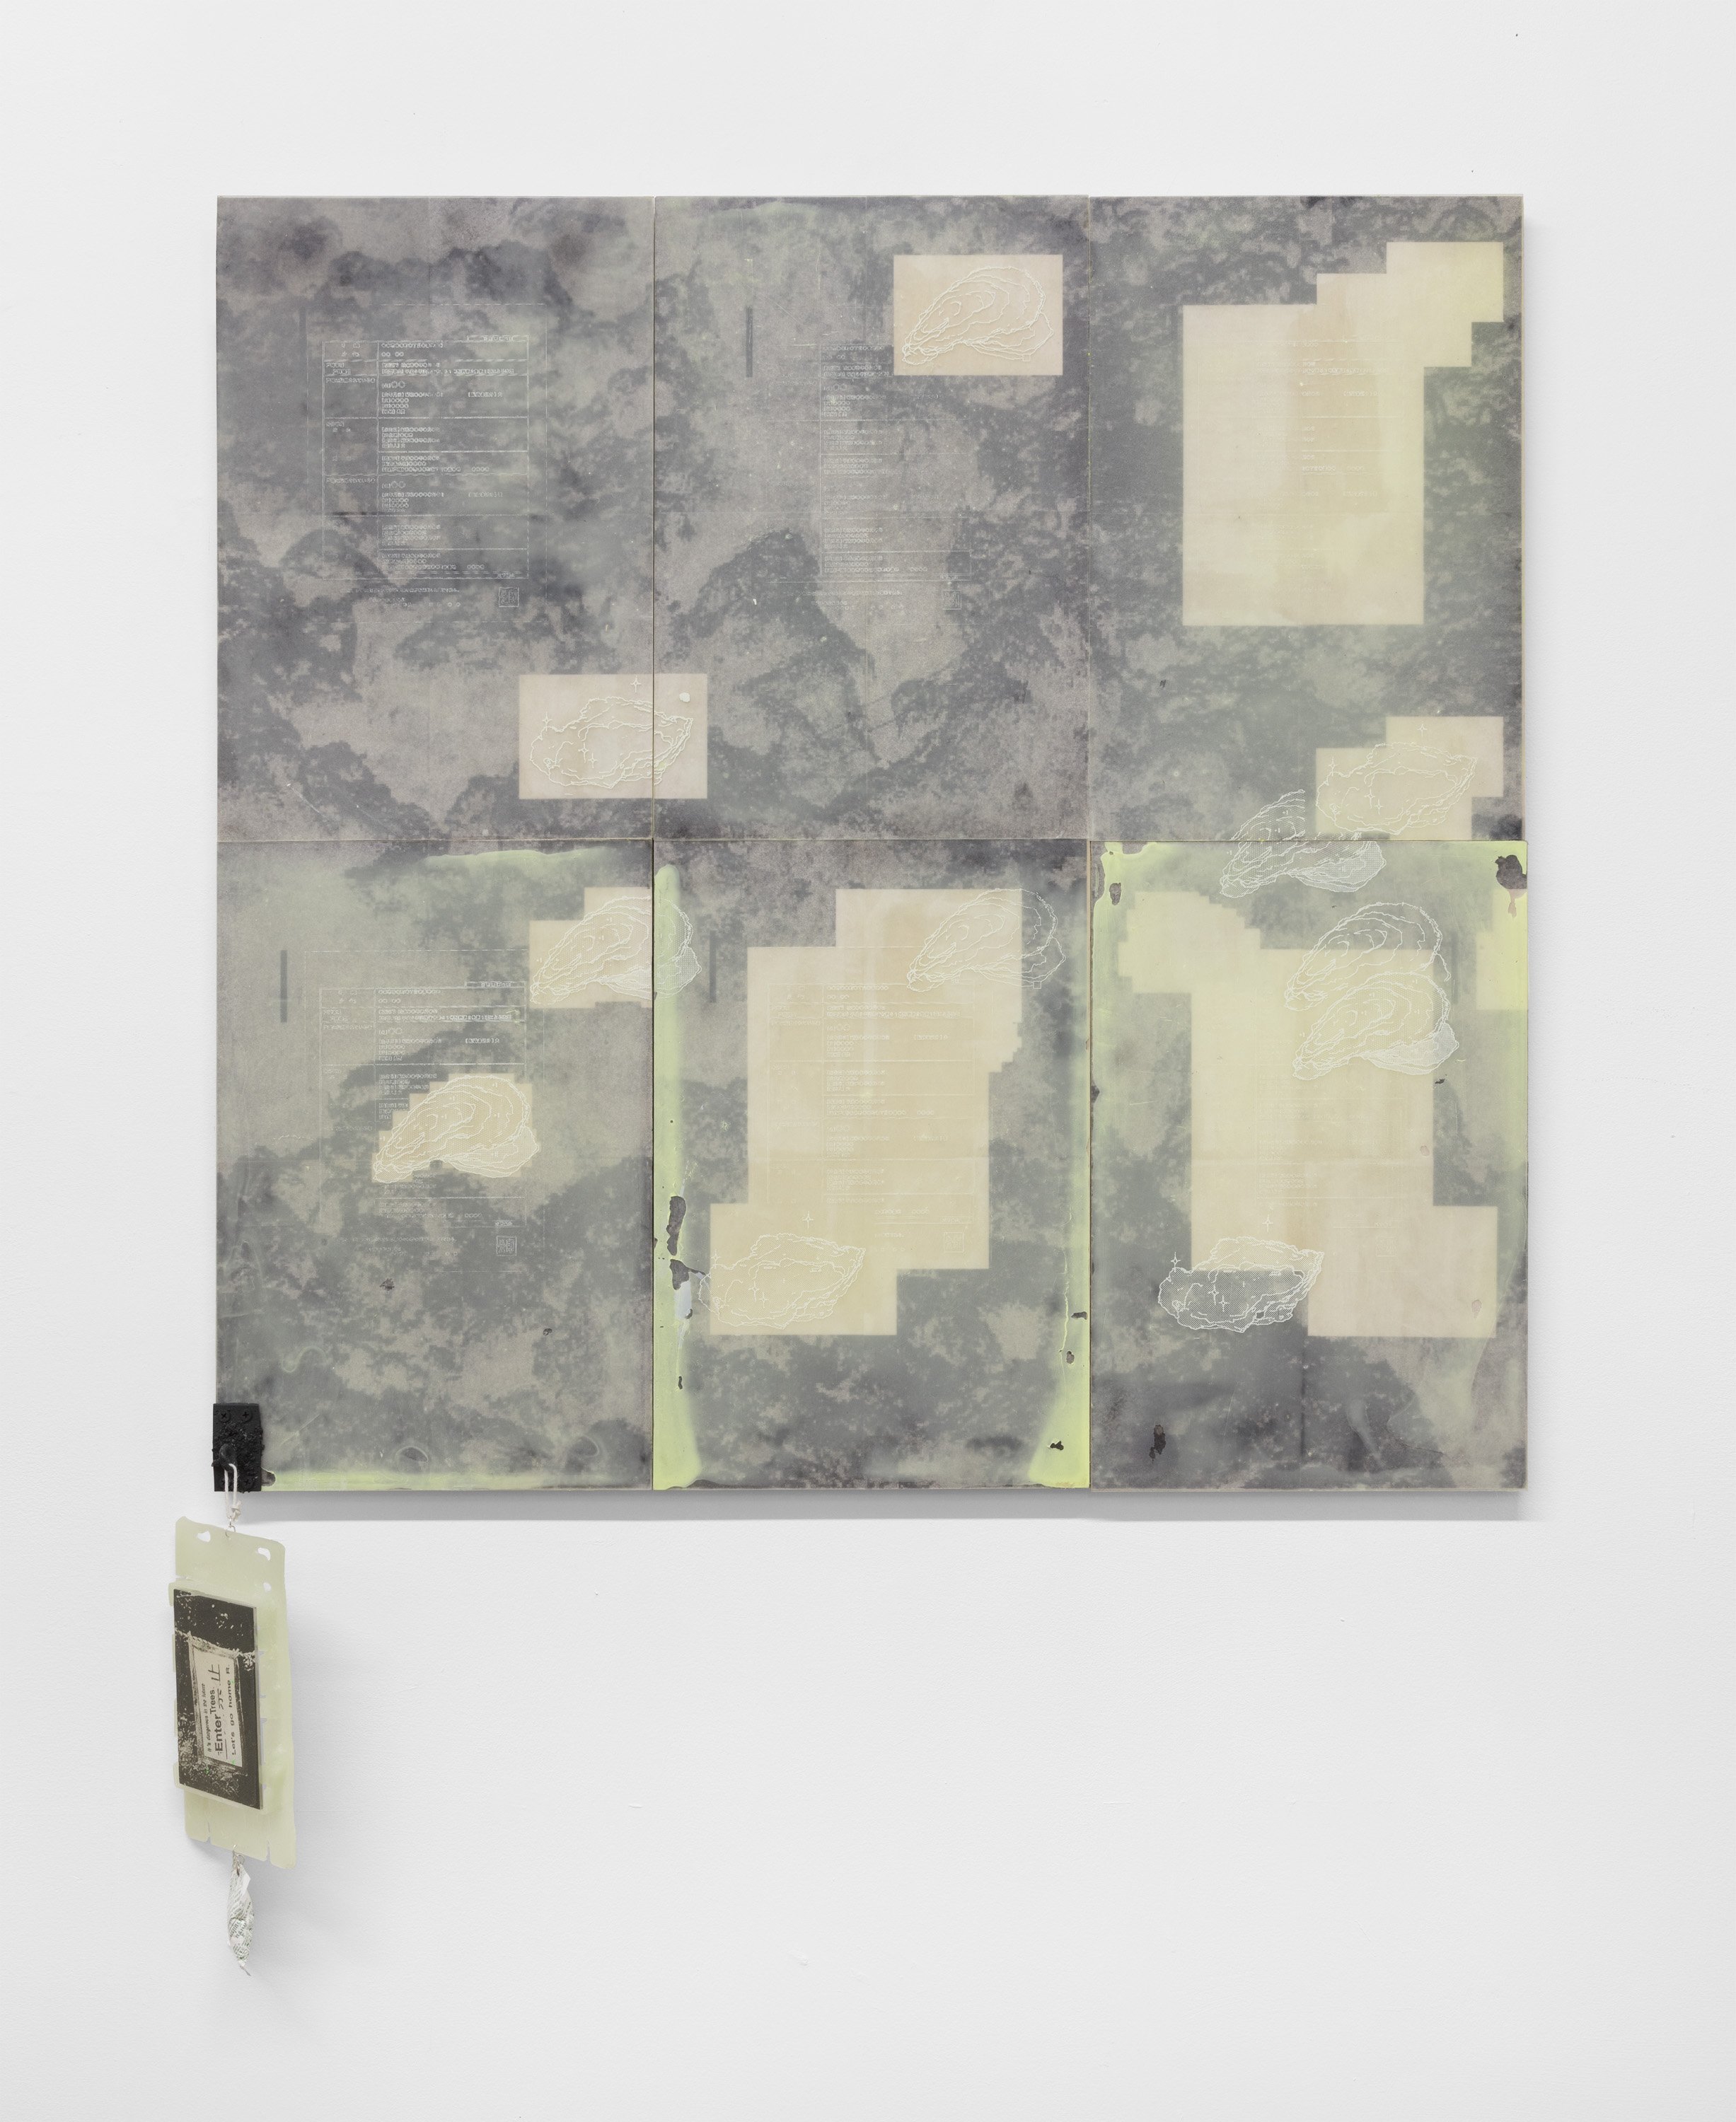   Brackish, Arborescent Fields Make for a Good Home (Koseki)   screenprint on plexiglass and polyurethane, pigment transfer on kozo, wood panel, silica pack 48 x 36 x 1 inches (12 x 18 inch panels)  2022 